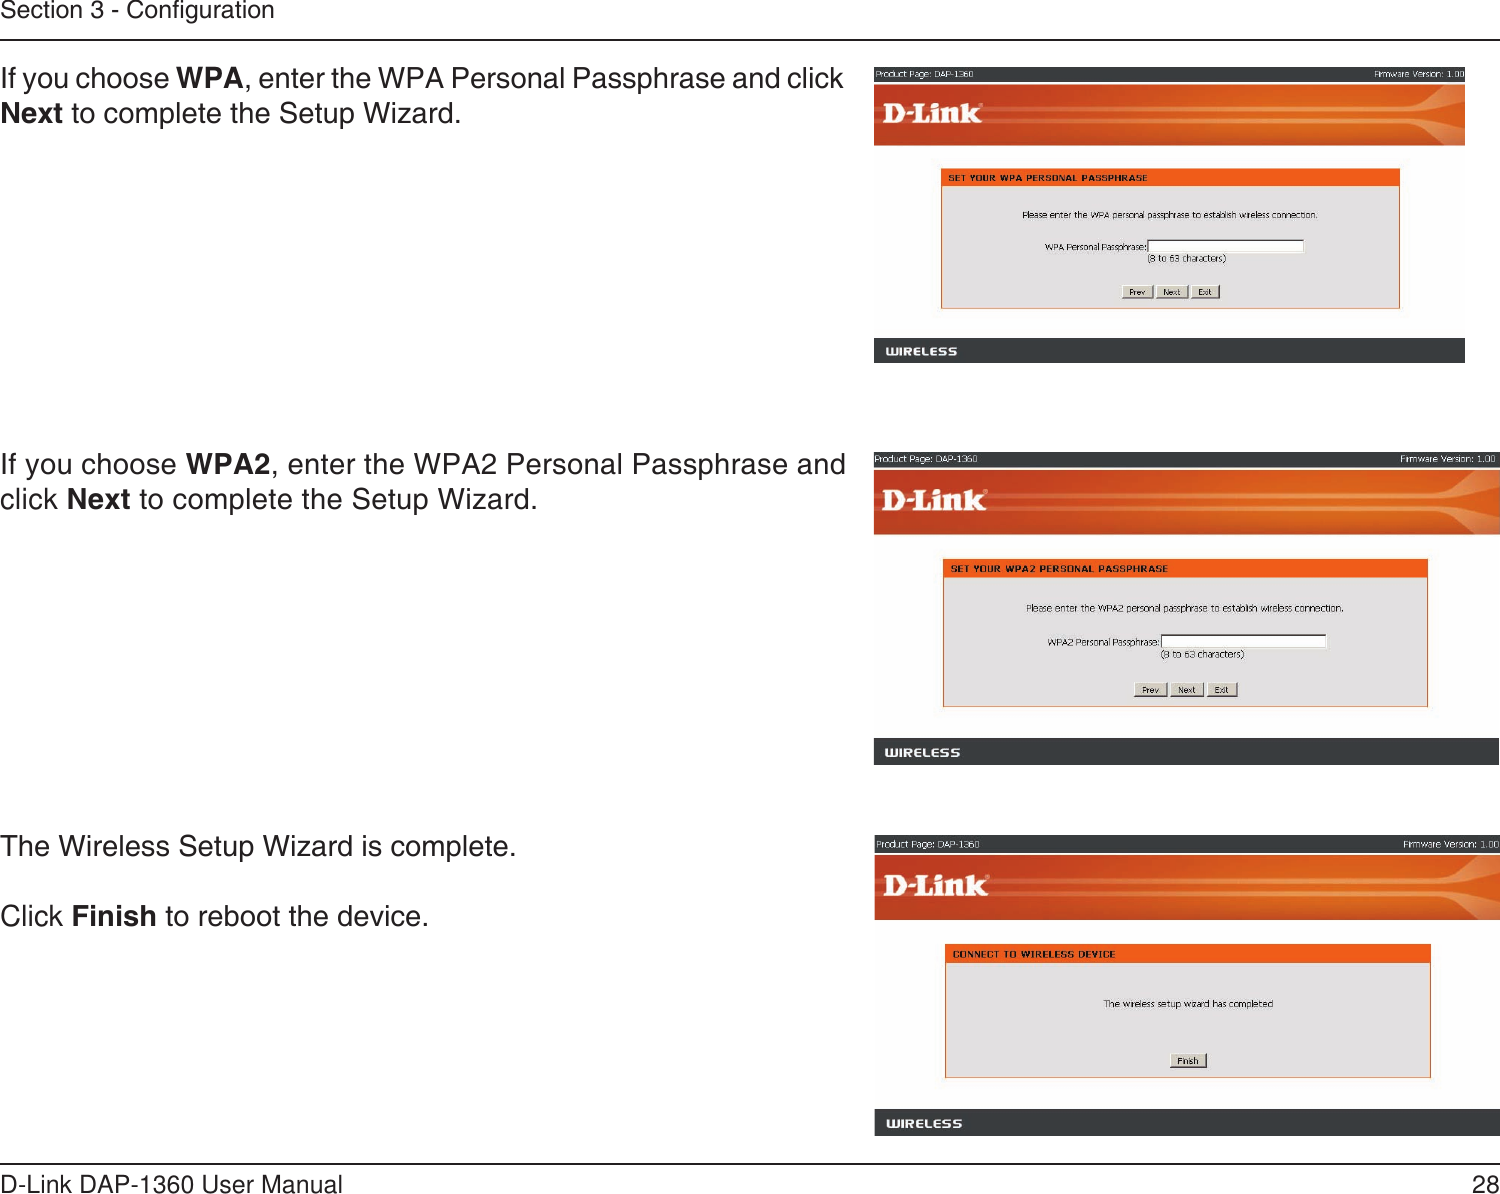 28D-Link DAP-1360 User ManualSection 3 - CongurationThe Wireless Setup Wizard is complete.Click Finish to reboot the device.If you choose WPA2, enter the WPA2 Personal Passphrase and click Next to complete the Setup Wizard.If you choose WPA, enter the WPA Personal Passphrase and click Next to complete the Setup Wizard.